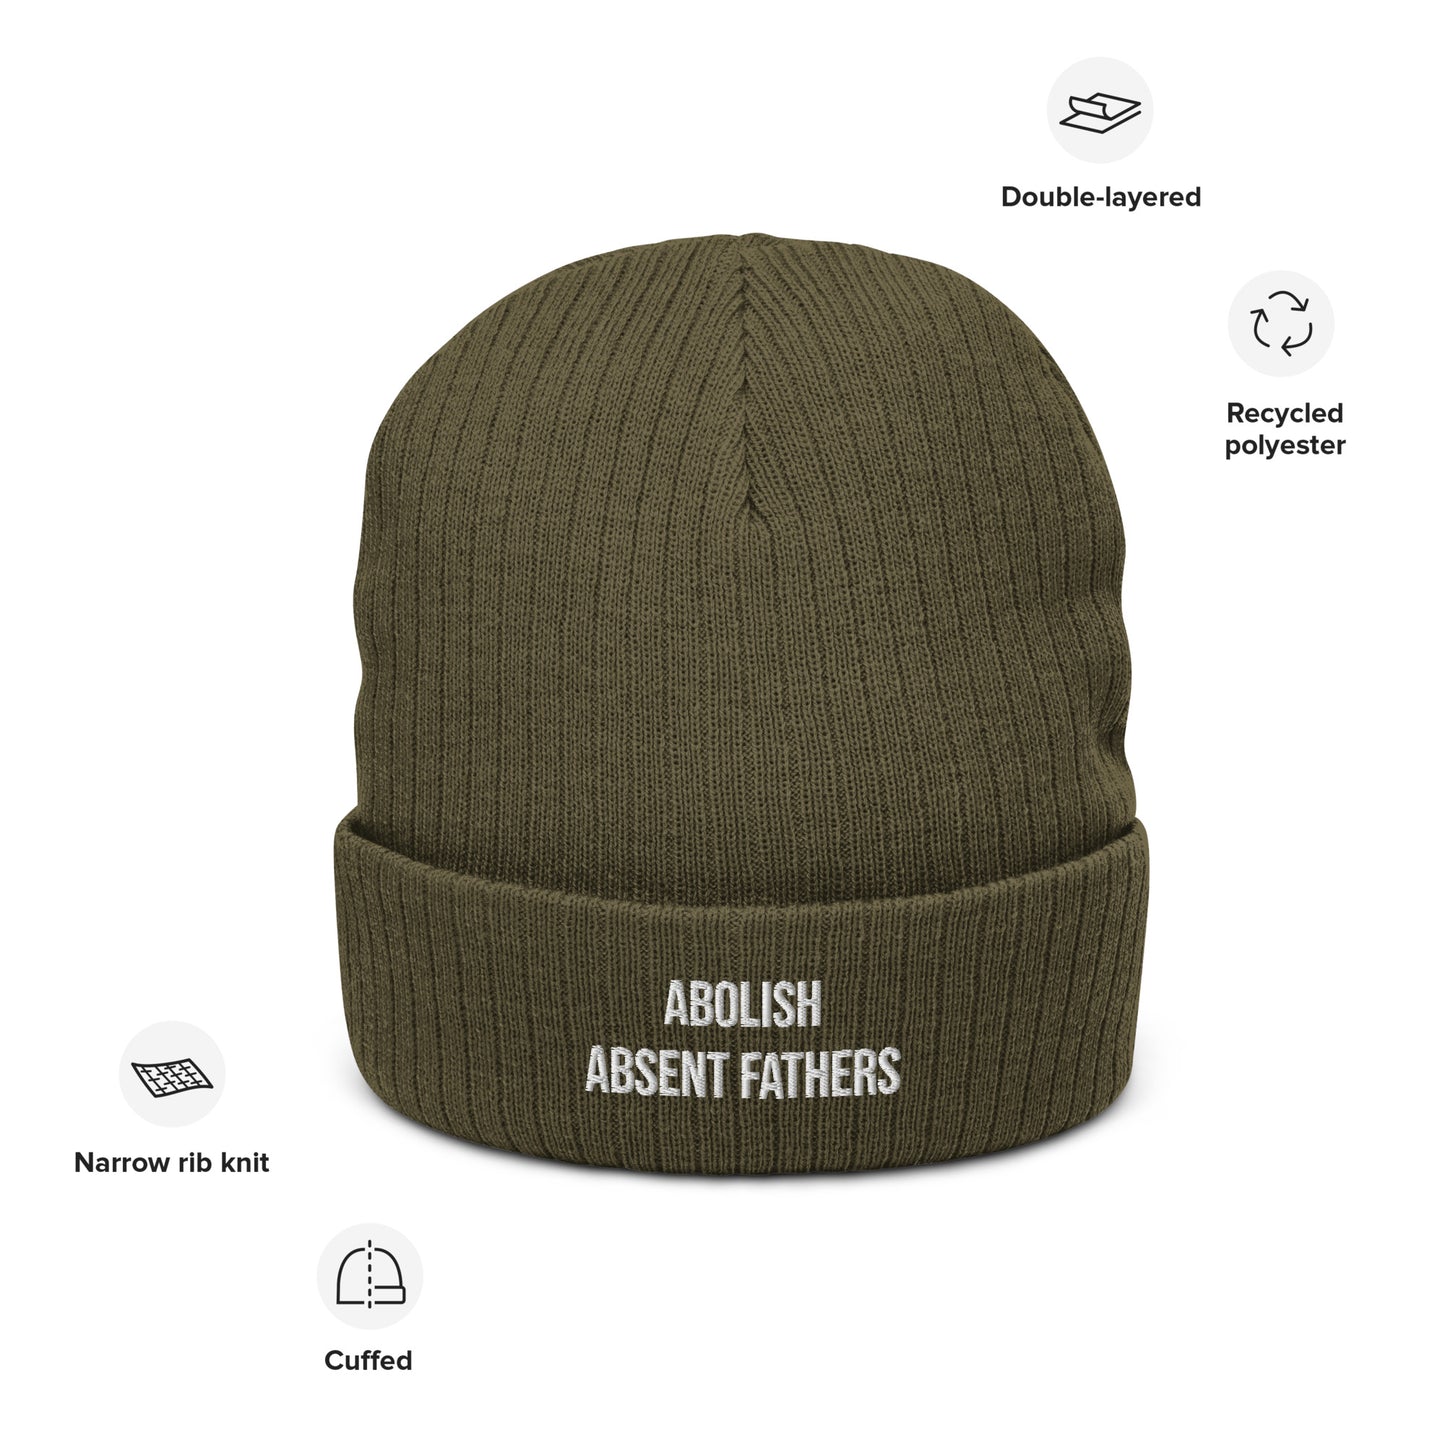 Abolish Absent Fathers Embroidered Unisex Beanie